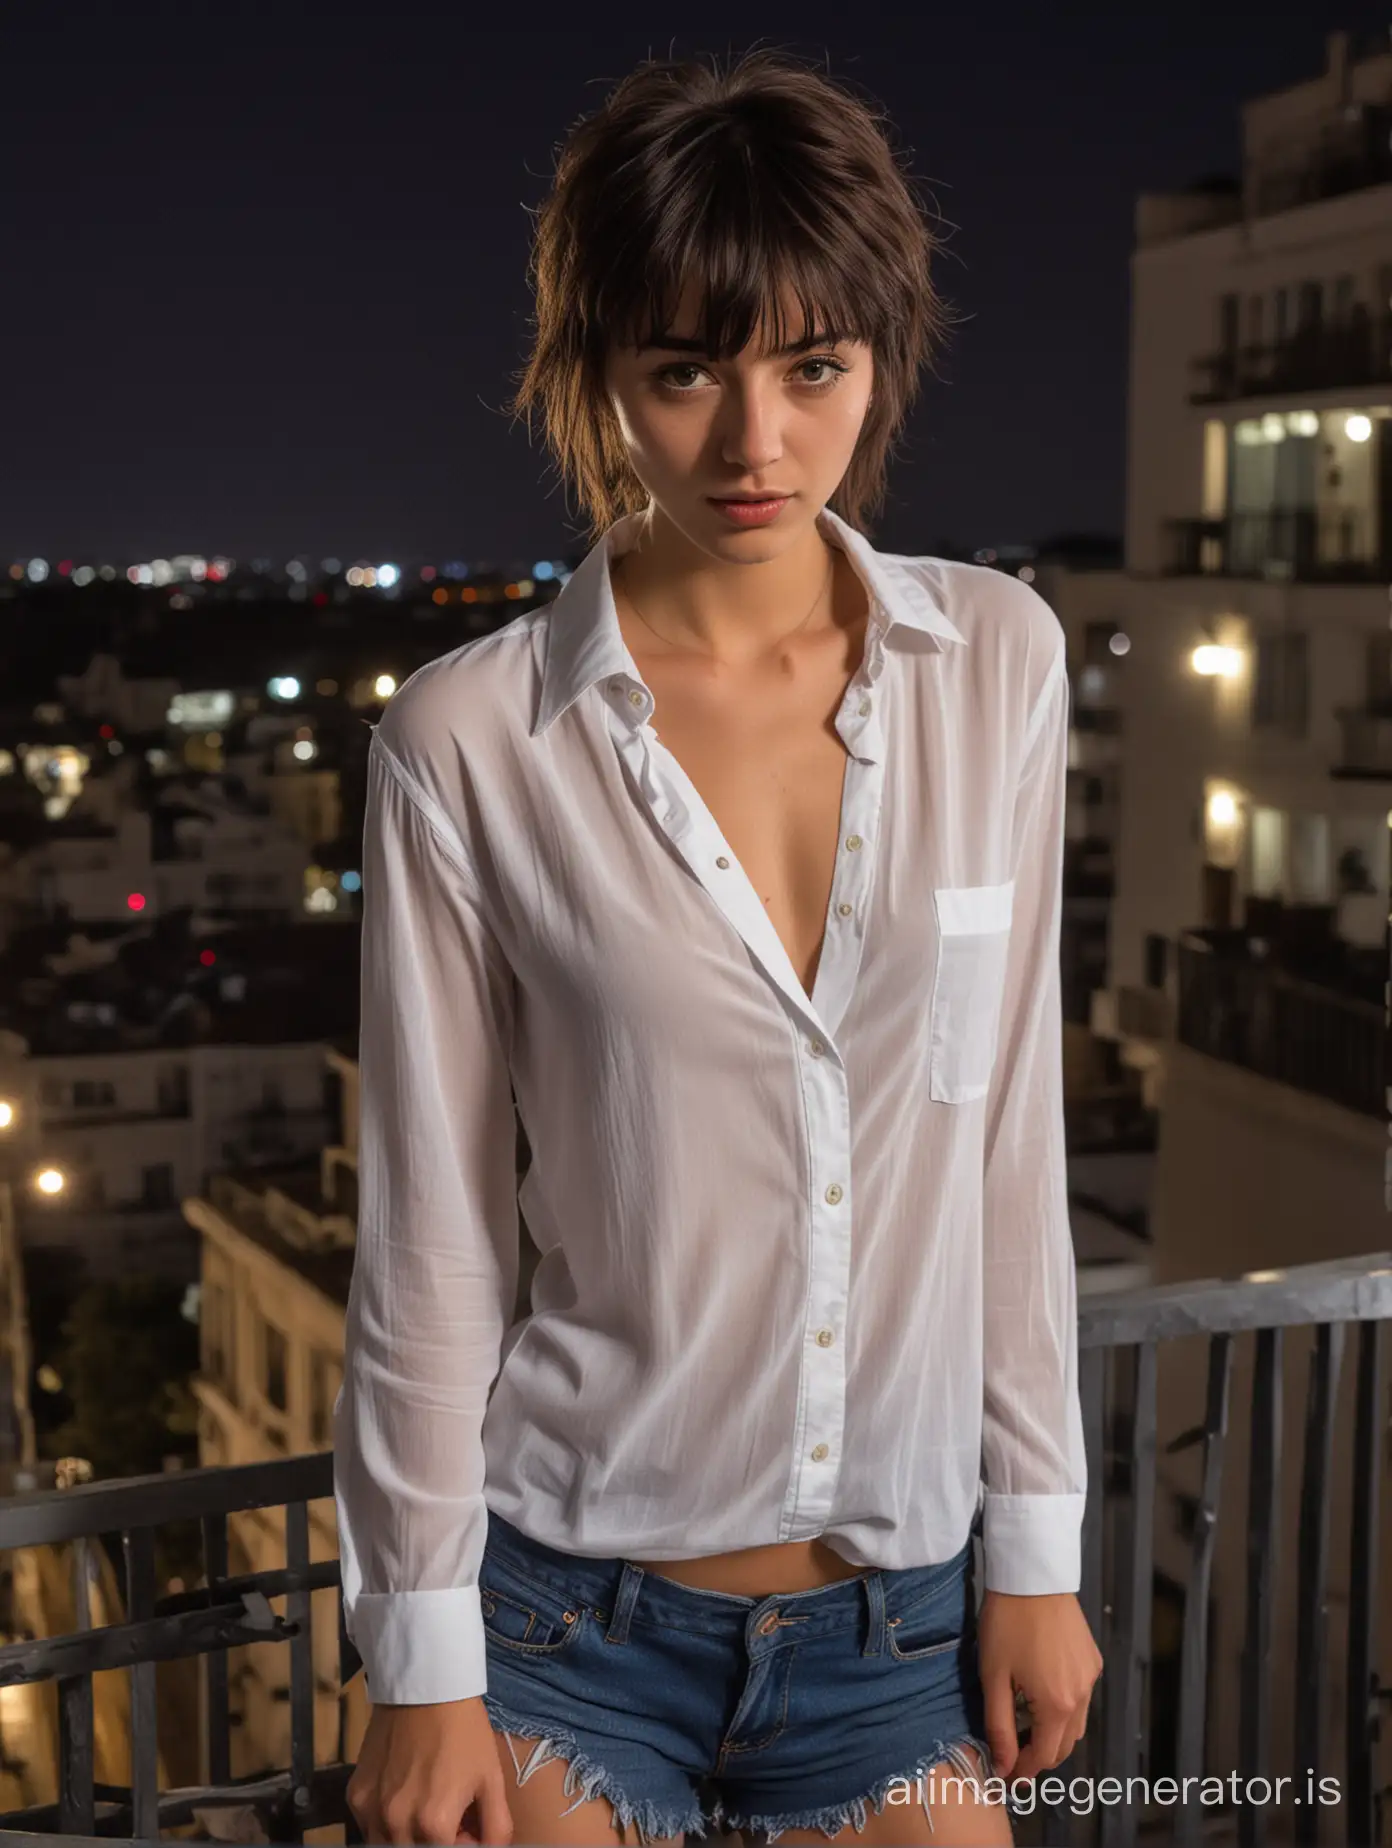 21 year old very slim girl  with short dark messy hair and bangs wearing a fully unbuttoned man's white shirt seductively posed on a balcony at night